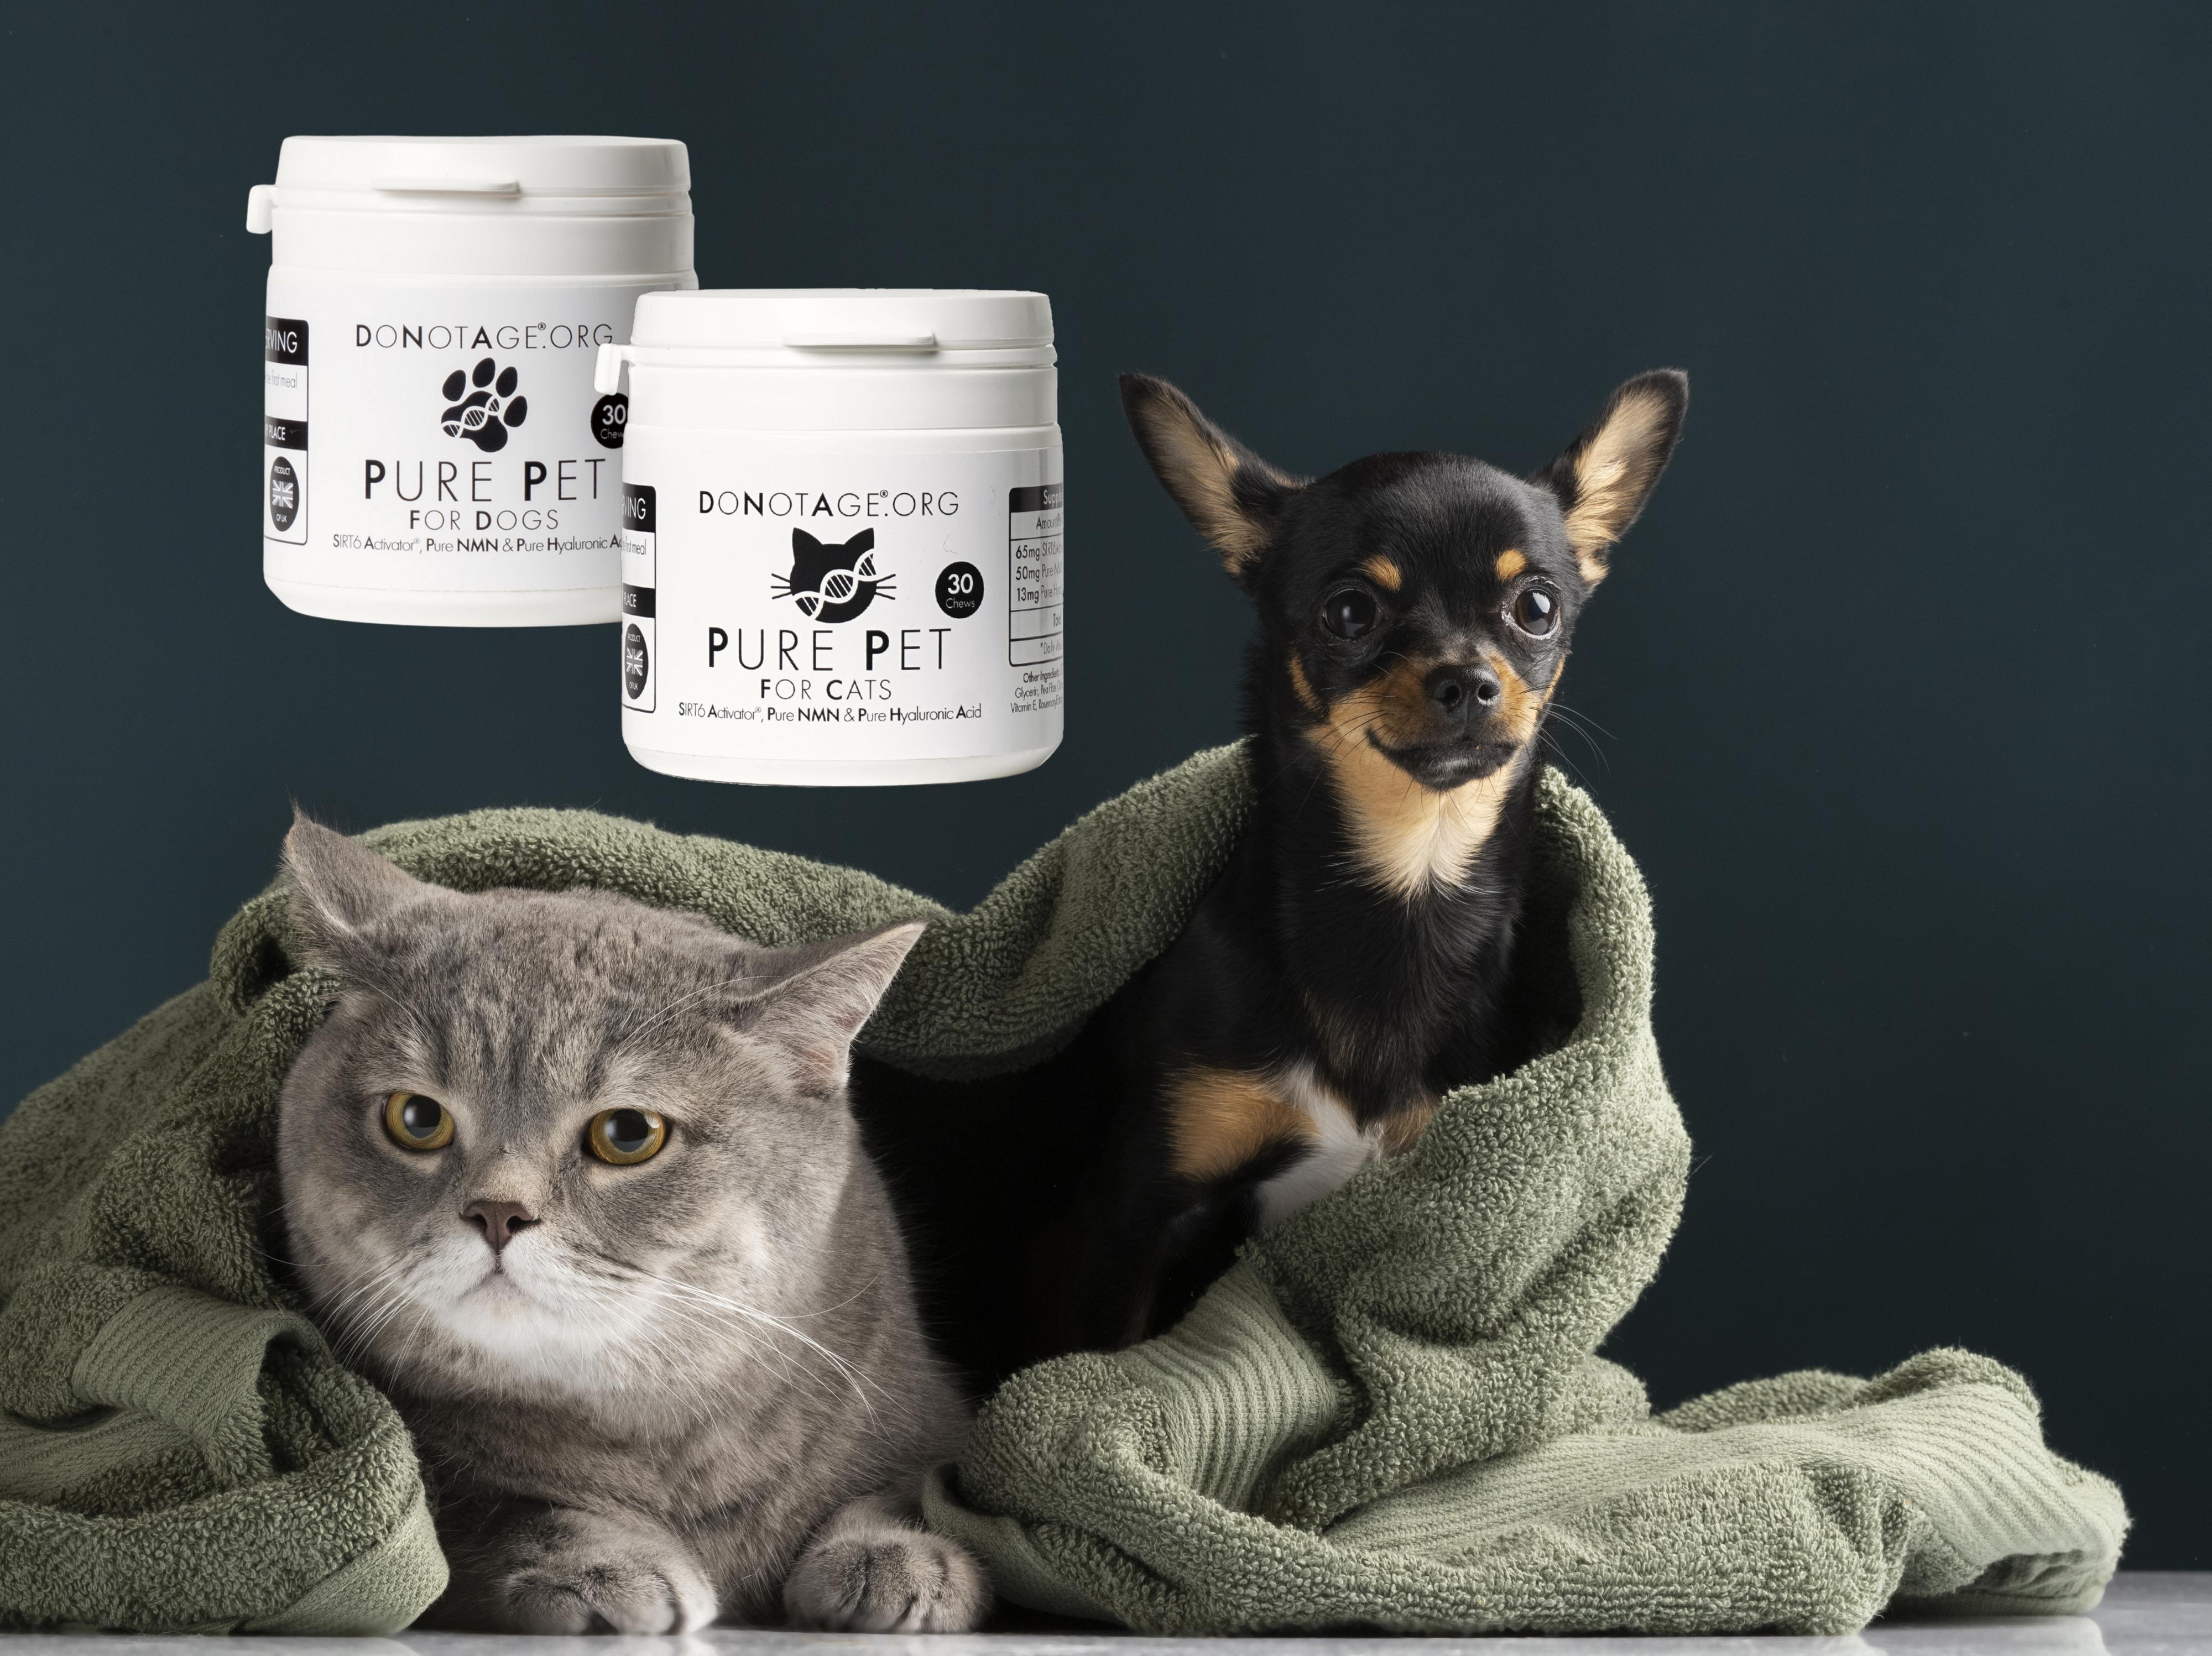 Cat_and_Dog_with_Products.jpg